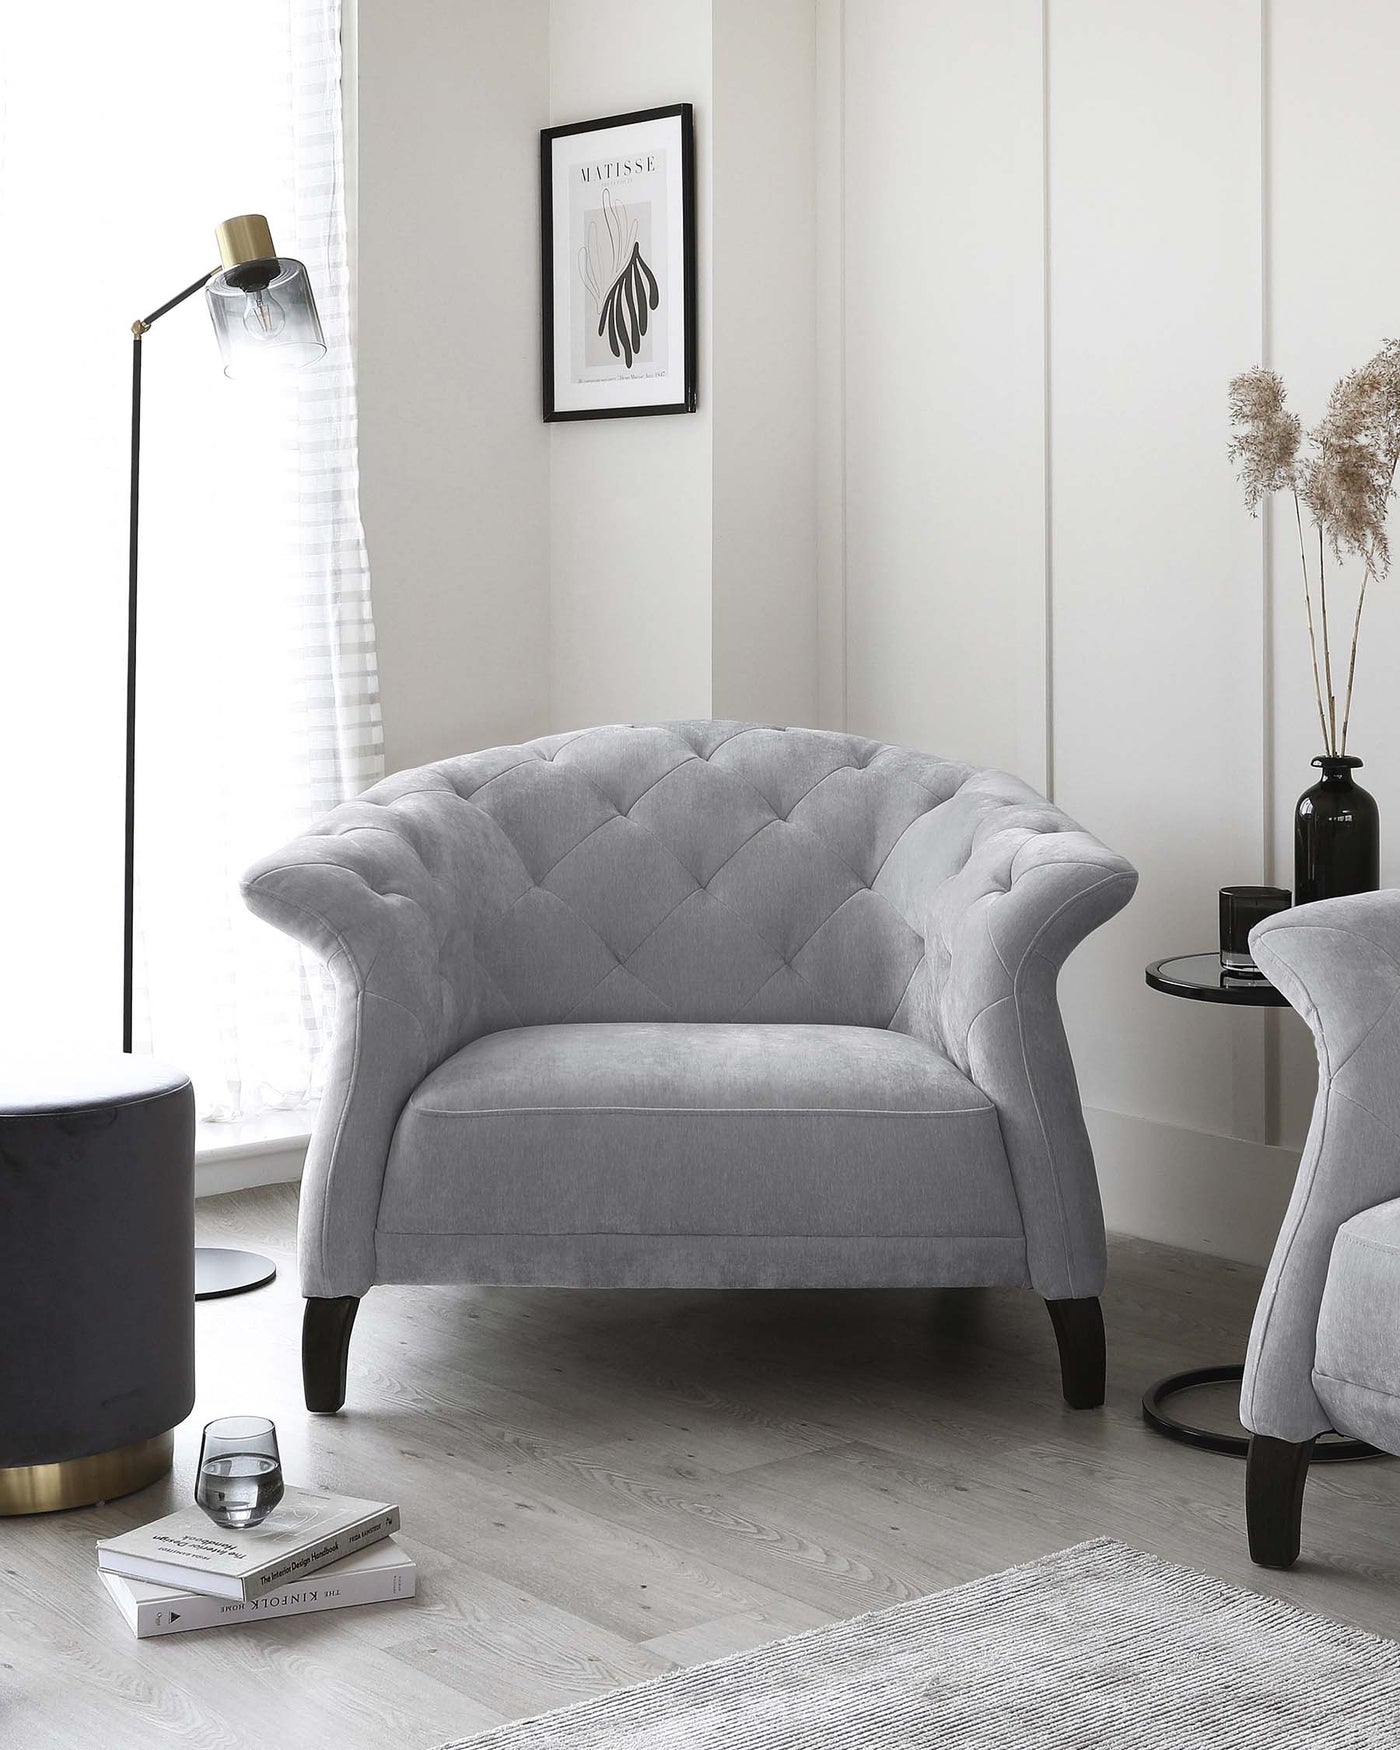 Elegant grey tufted loveseat with a curved backrest and rolled arms, featuring plush upholstery and dark wooden legs, placed on a light wooden floor, accompanied by a contemporary black and gold side table.